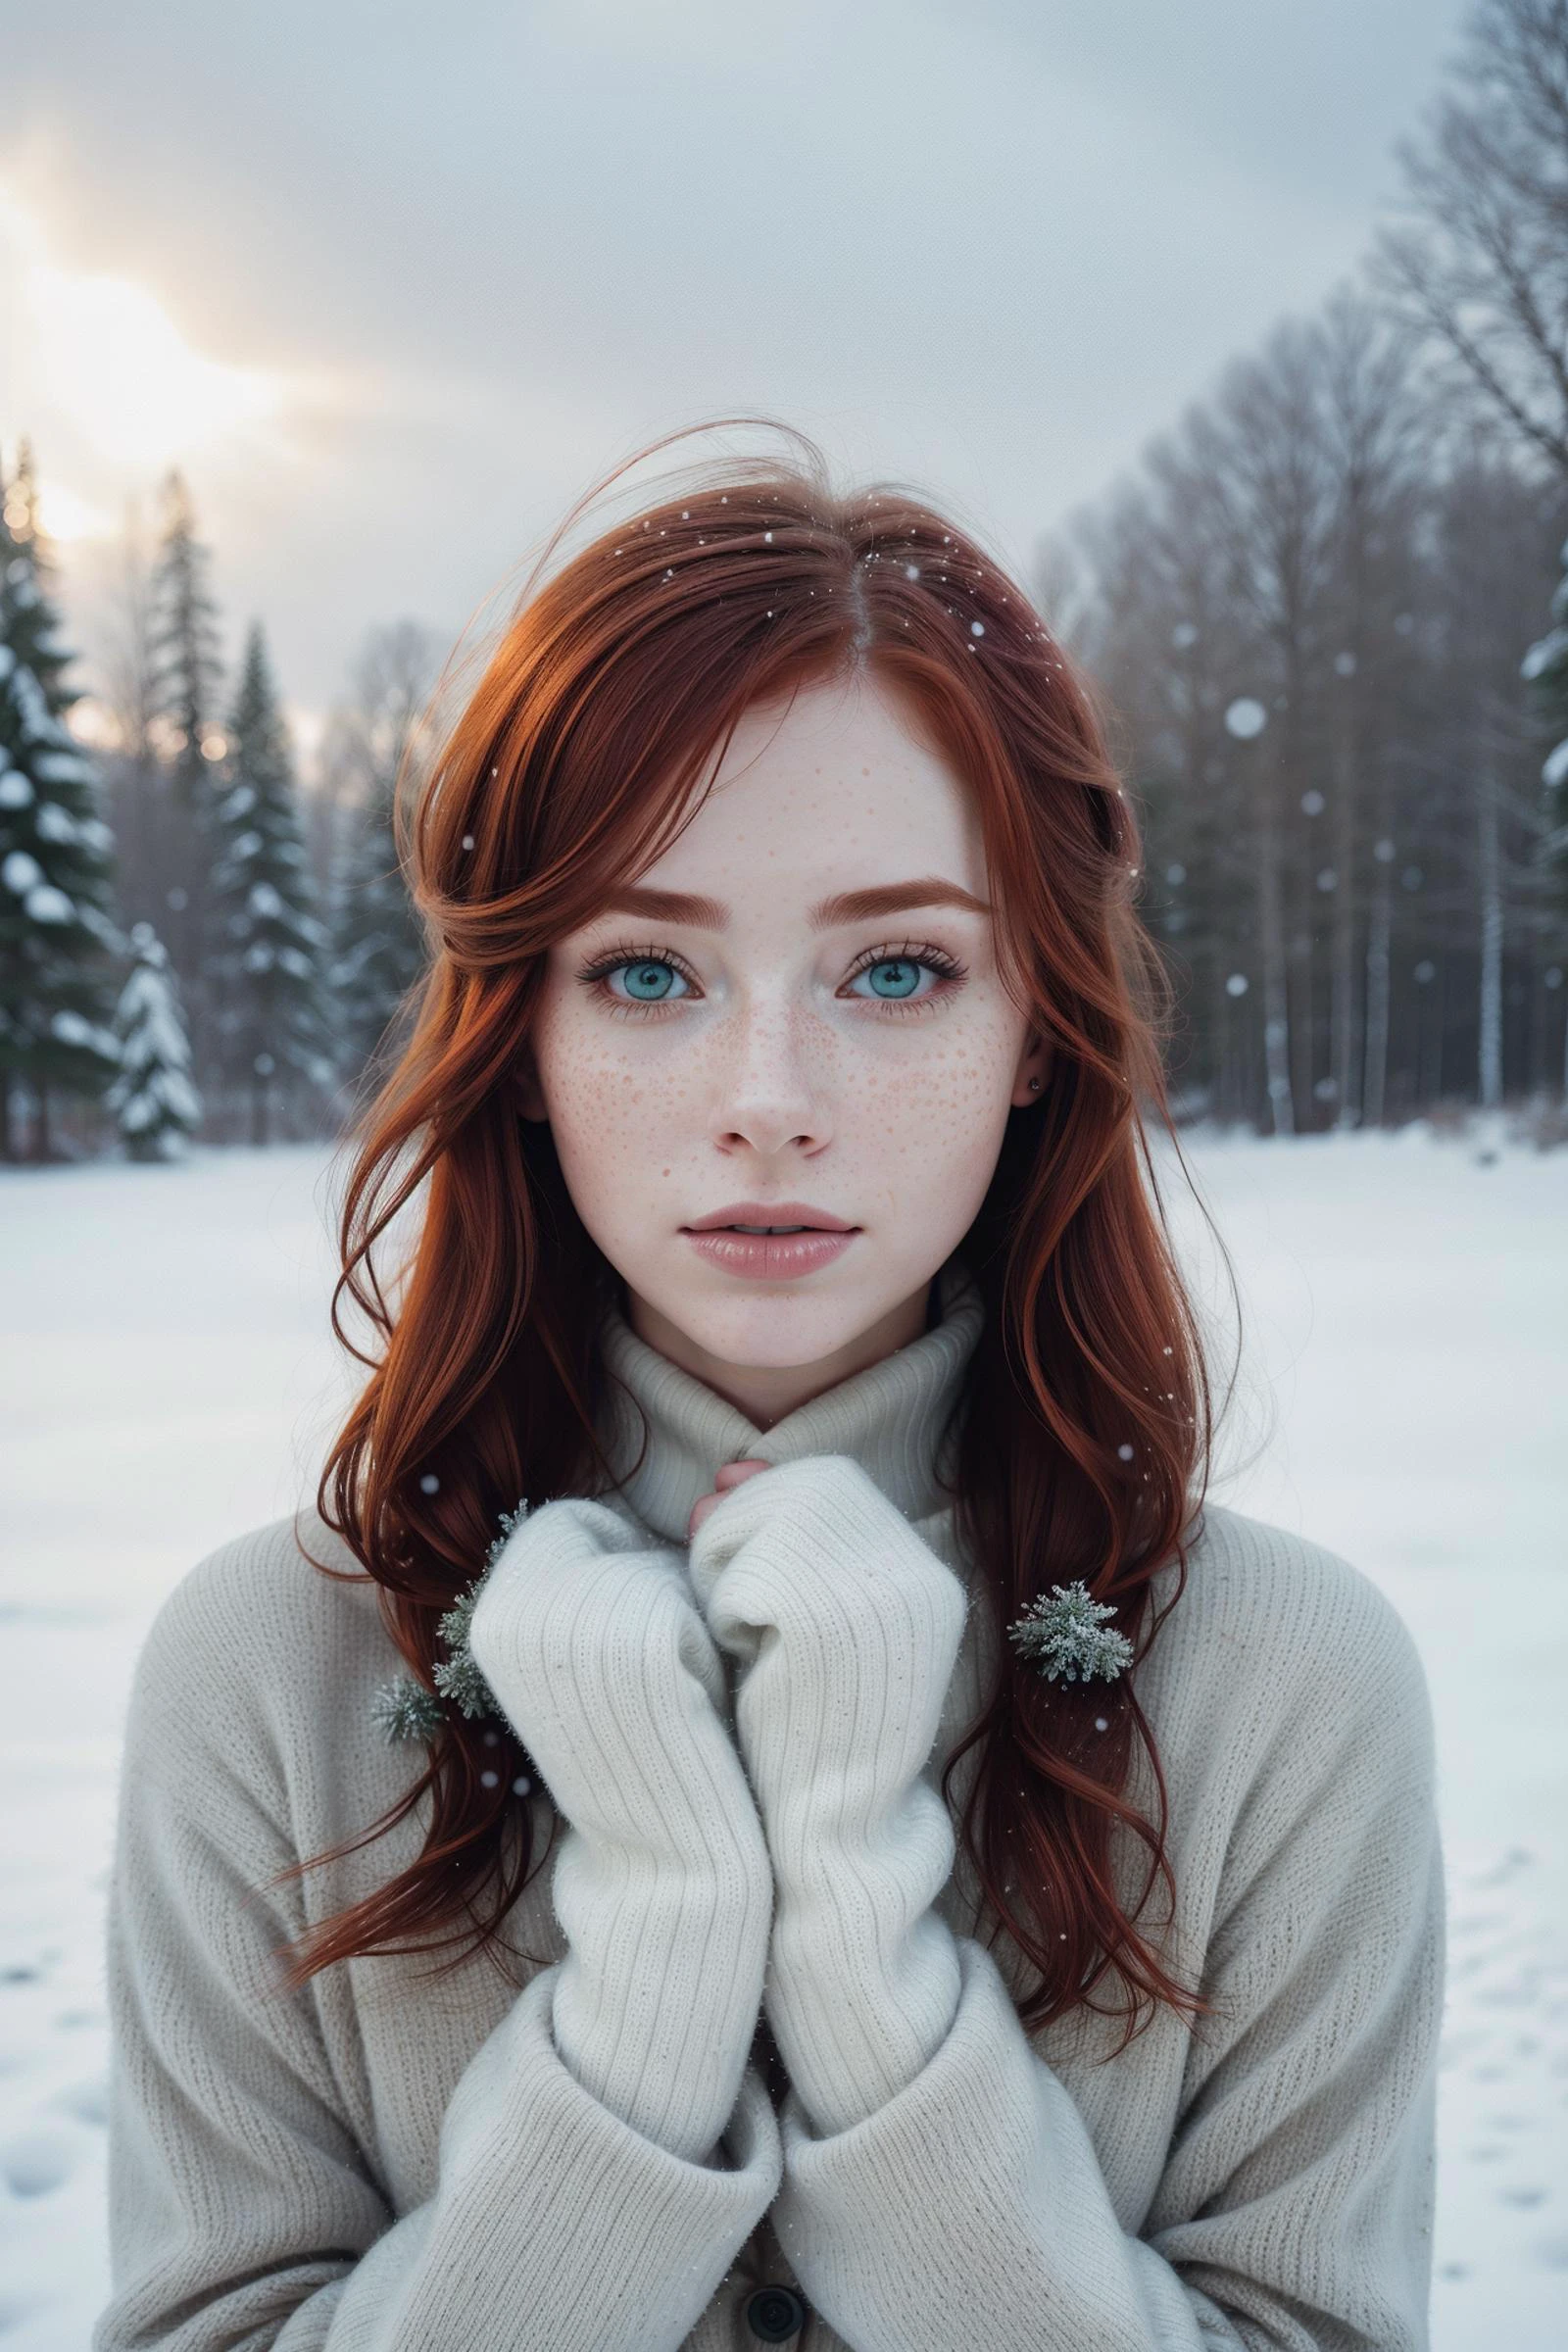 candid,  1woman,sad redhead,light freckles,snow on hair,  dreamy haze,light clothes,gloves, winter wonderland, snow storm, god rays,nature,  instant photo,realistic ,pastel, soft light,  dark skies,Lomochrome color film, perfect face, perfect symetrical detailed green eyes, beauty marks,